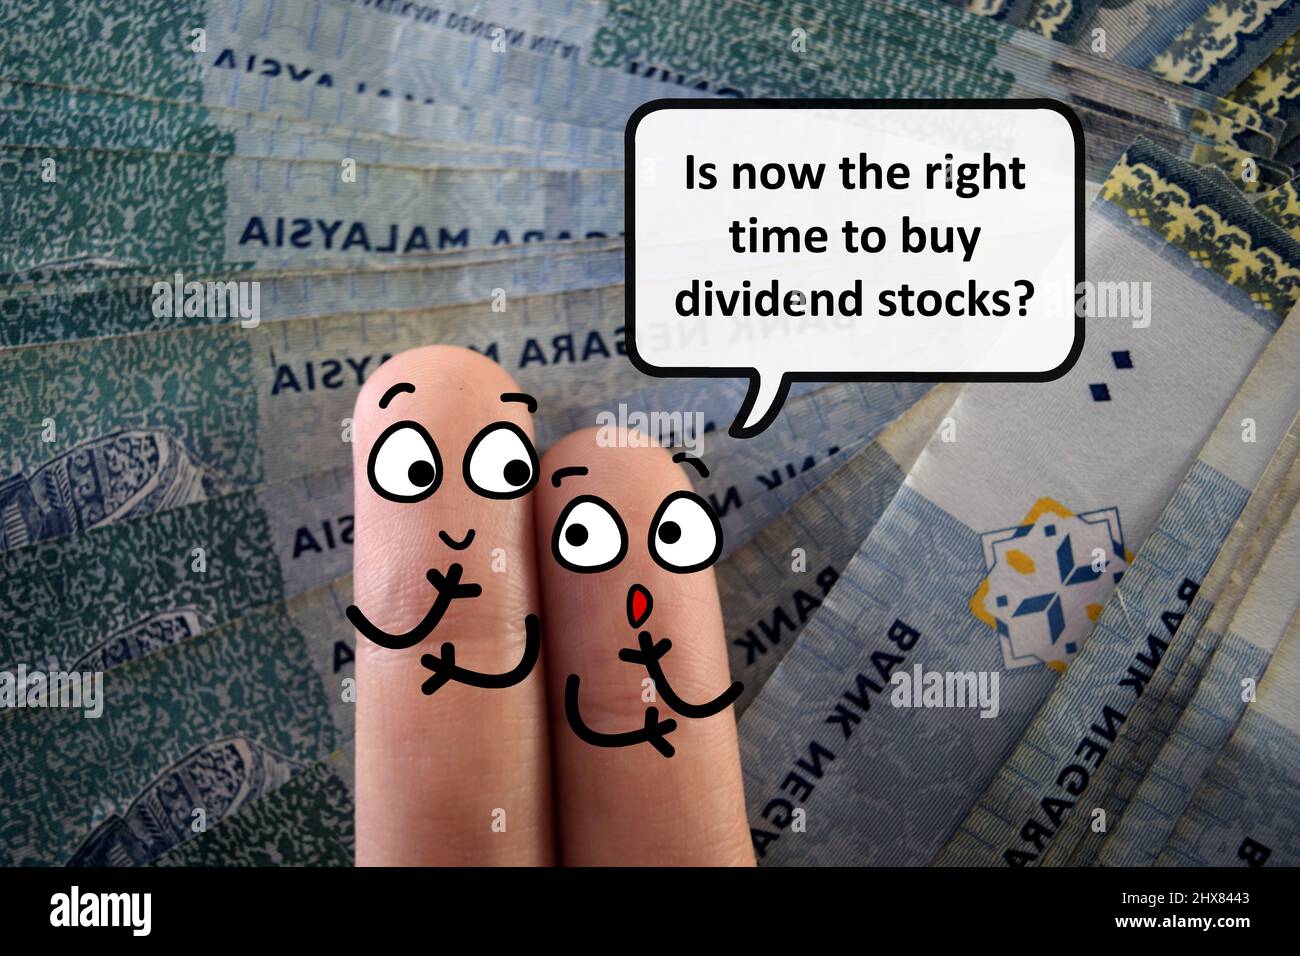 Two fingers are decorated as two person. They are discussing if it is the right time to buy dividend stocks. Stock Photo